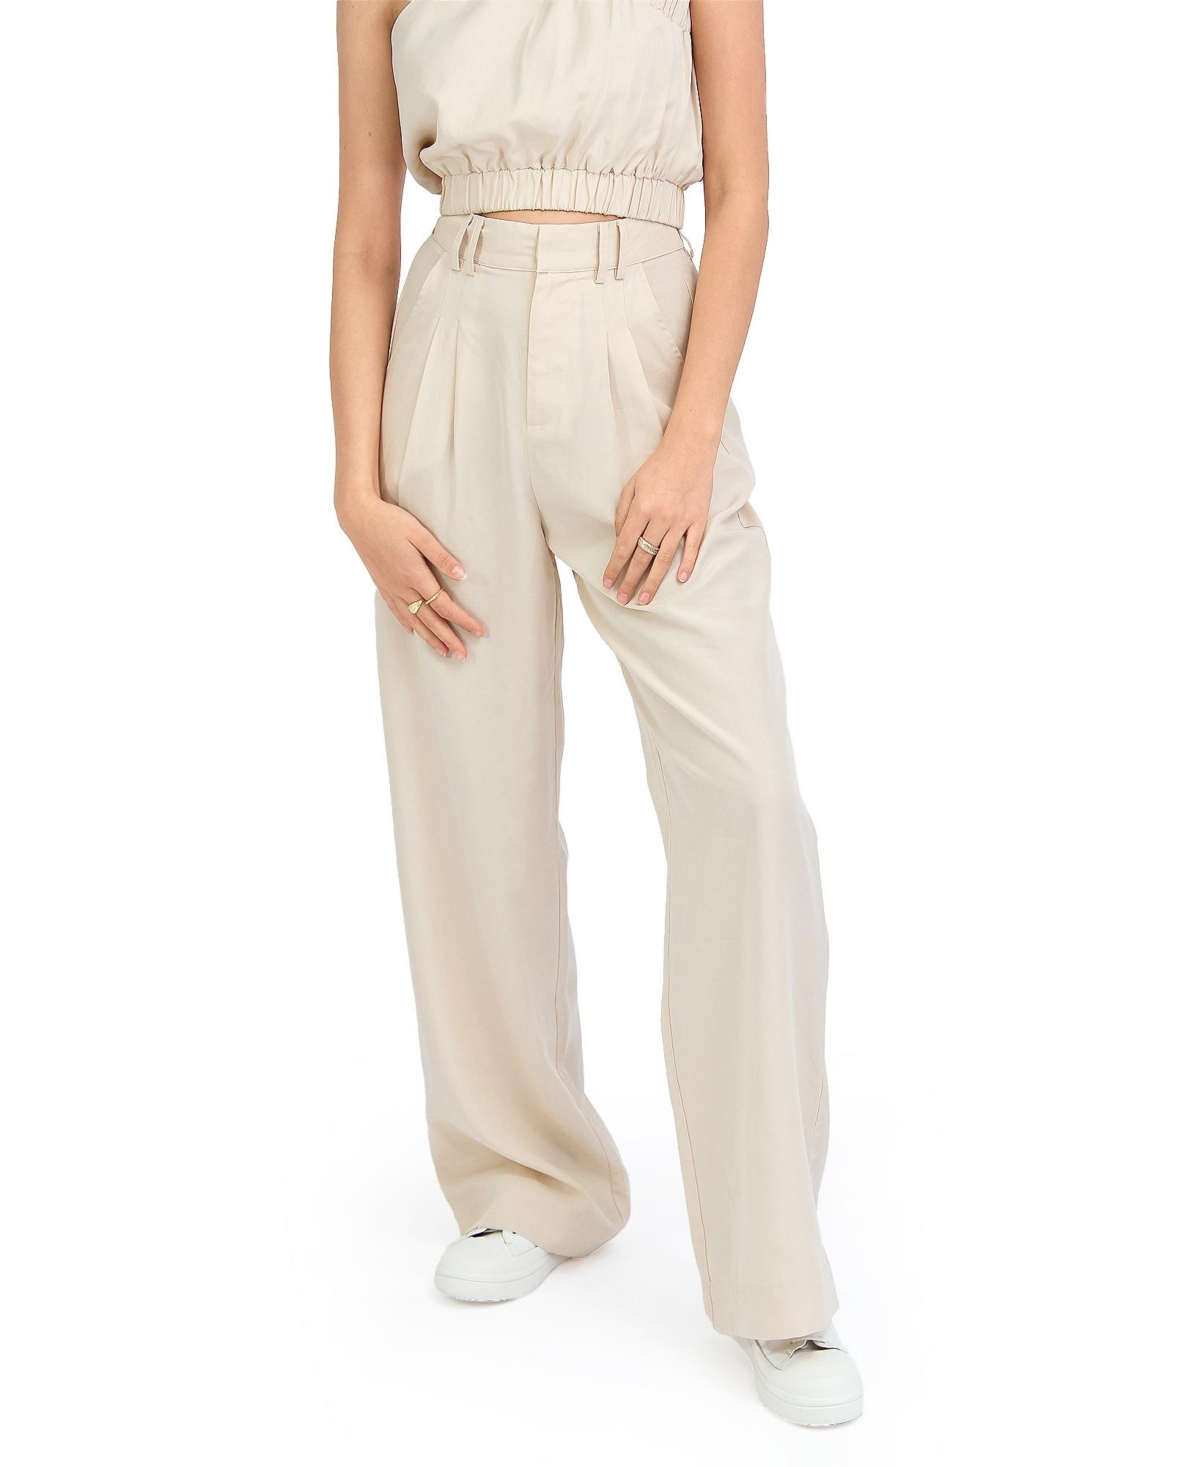 Women Belle & Bloom State of Play Wide Leg Pant - Sand